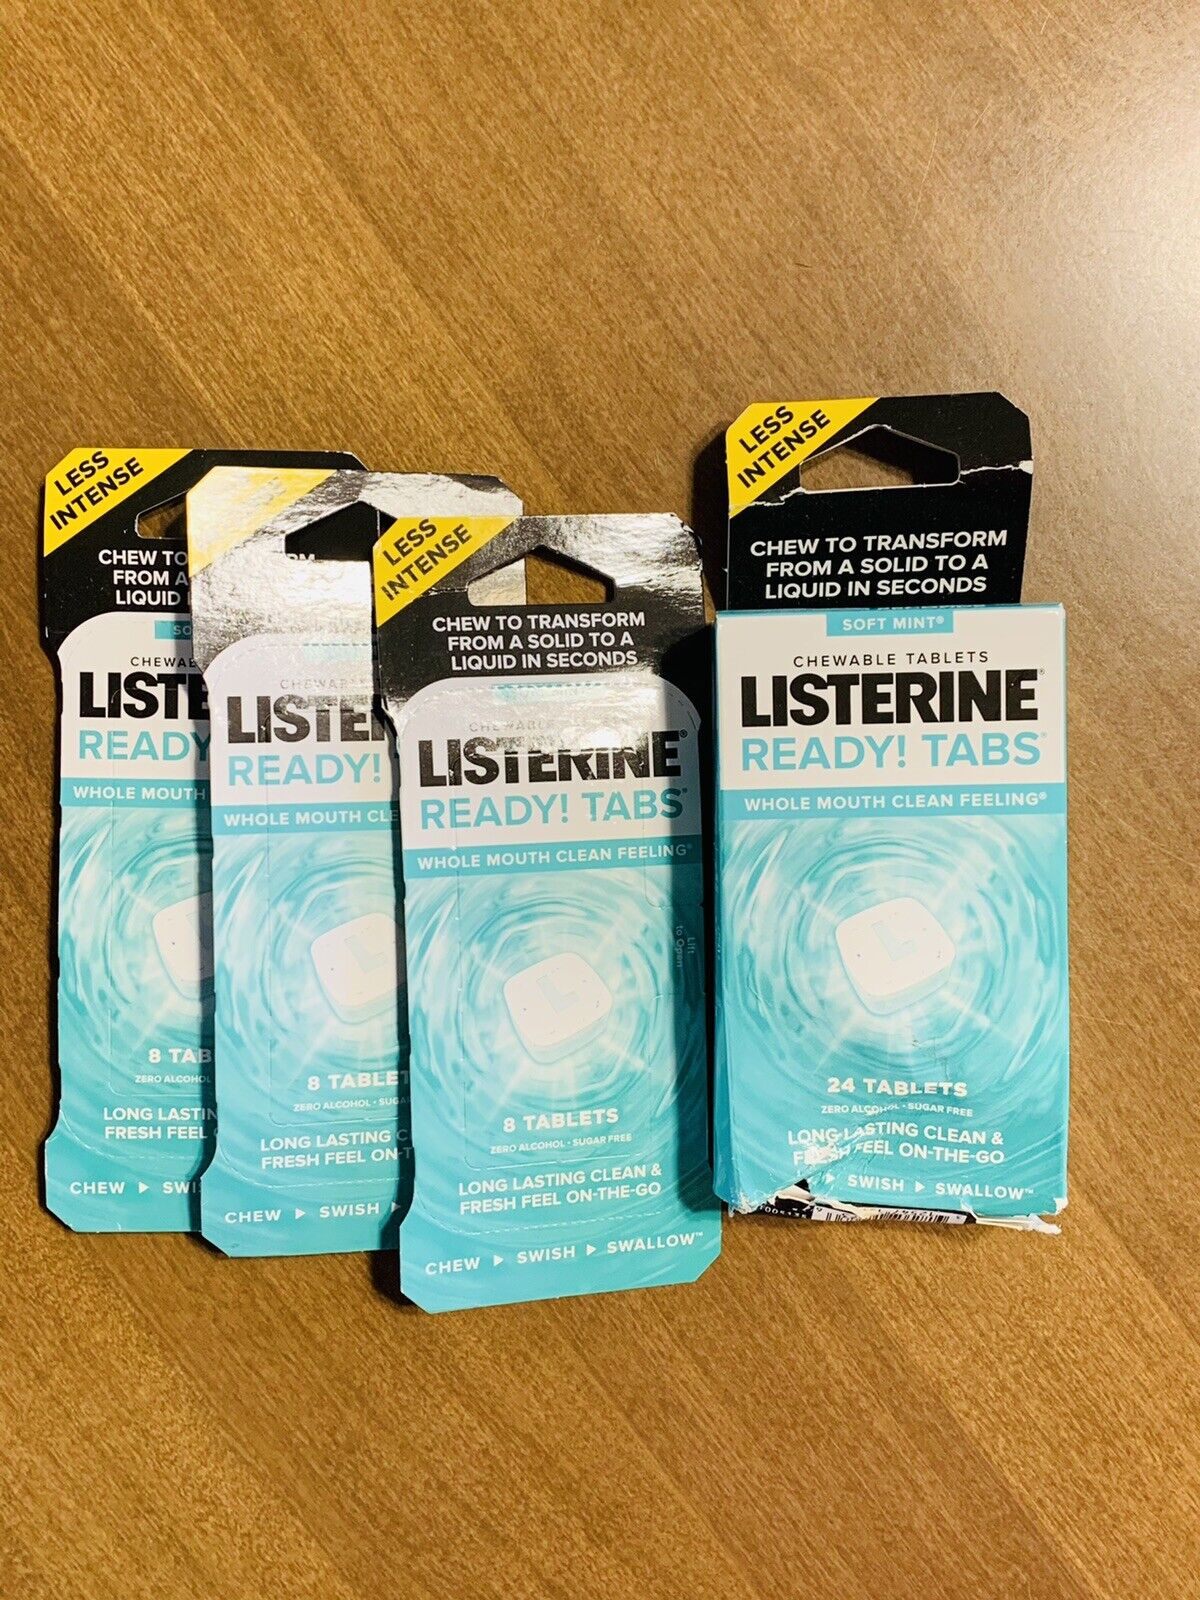 Listerine Soft Mint Chewable Ready! Tabs 4 Pack=48 Tablets - Soft Mint - New